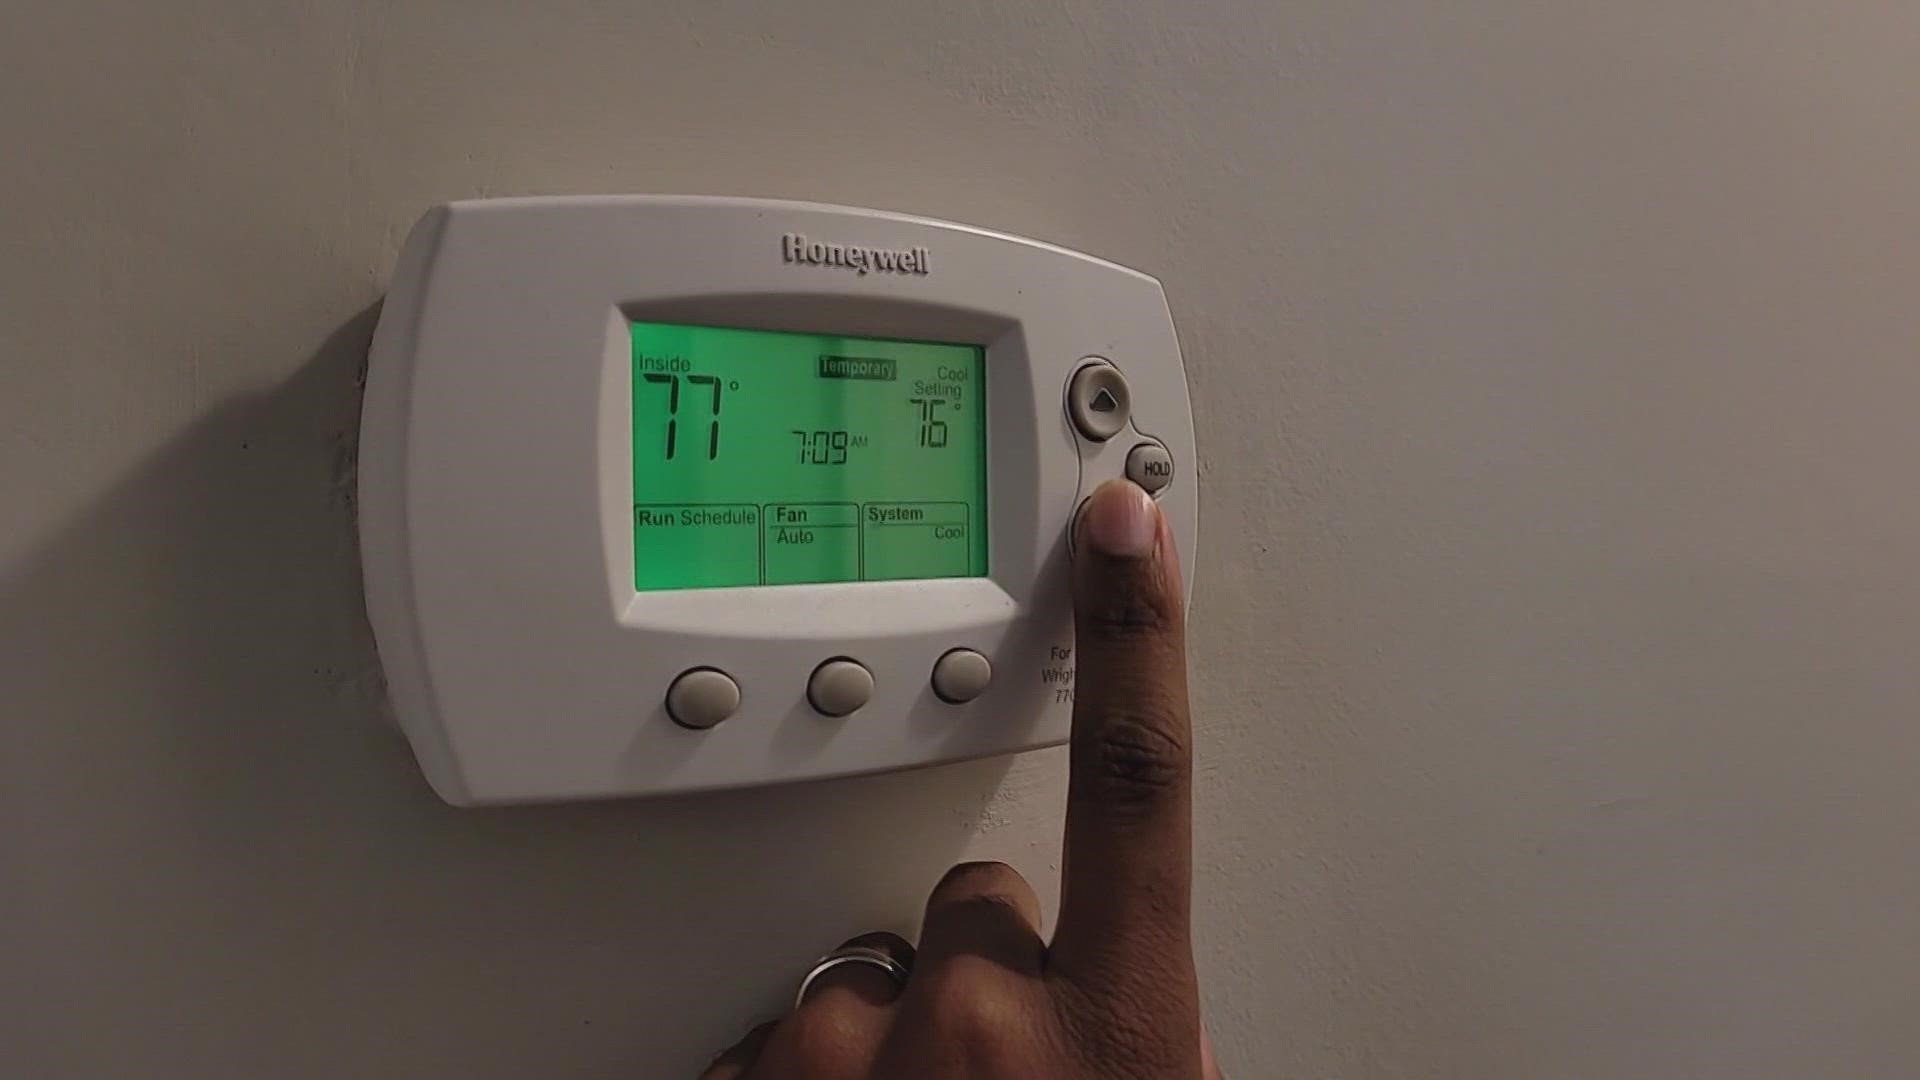 The cost to heat your home will likely go up this winter. Here's how you can save.